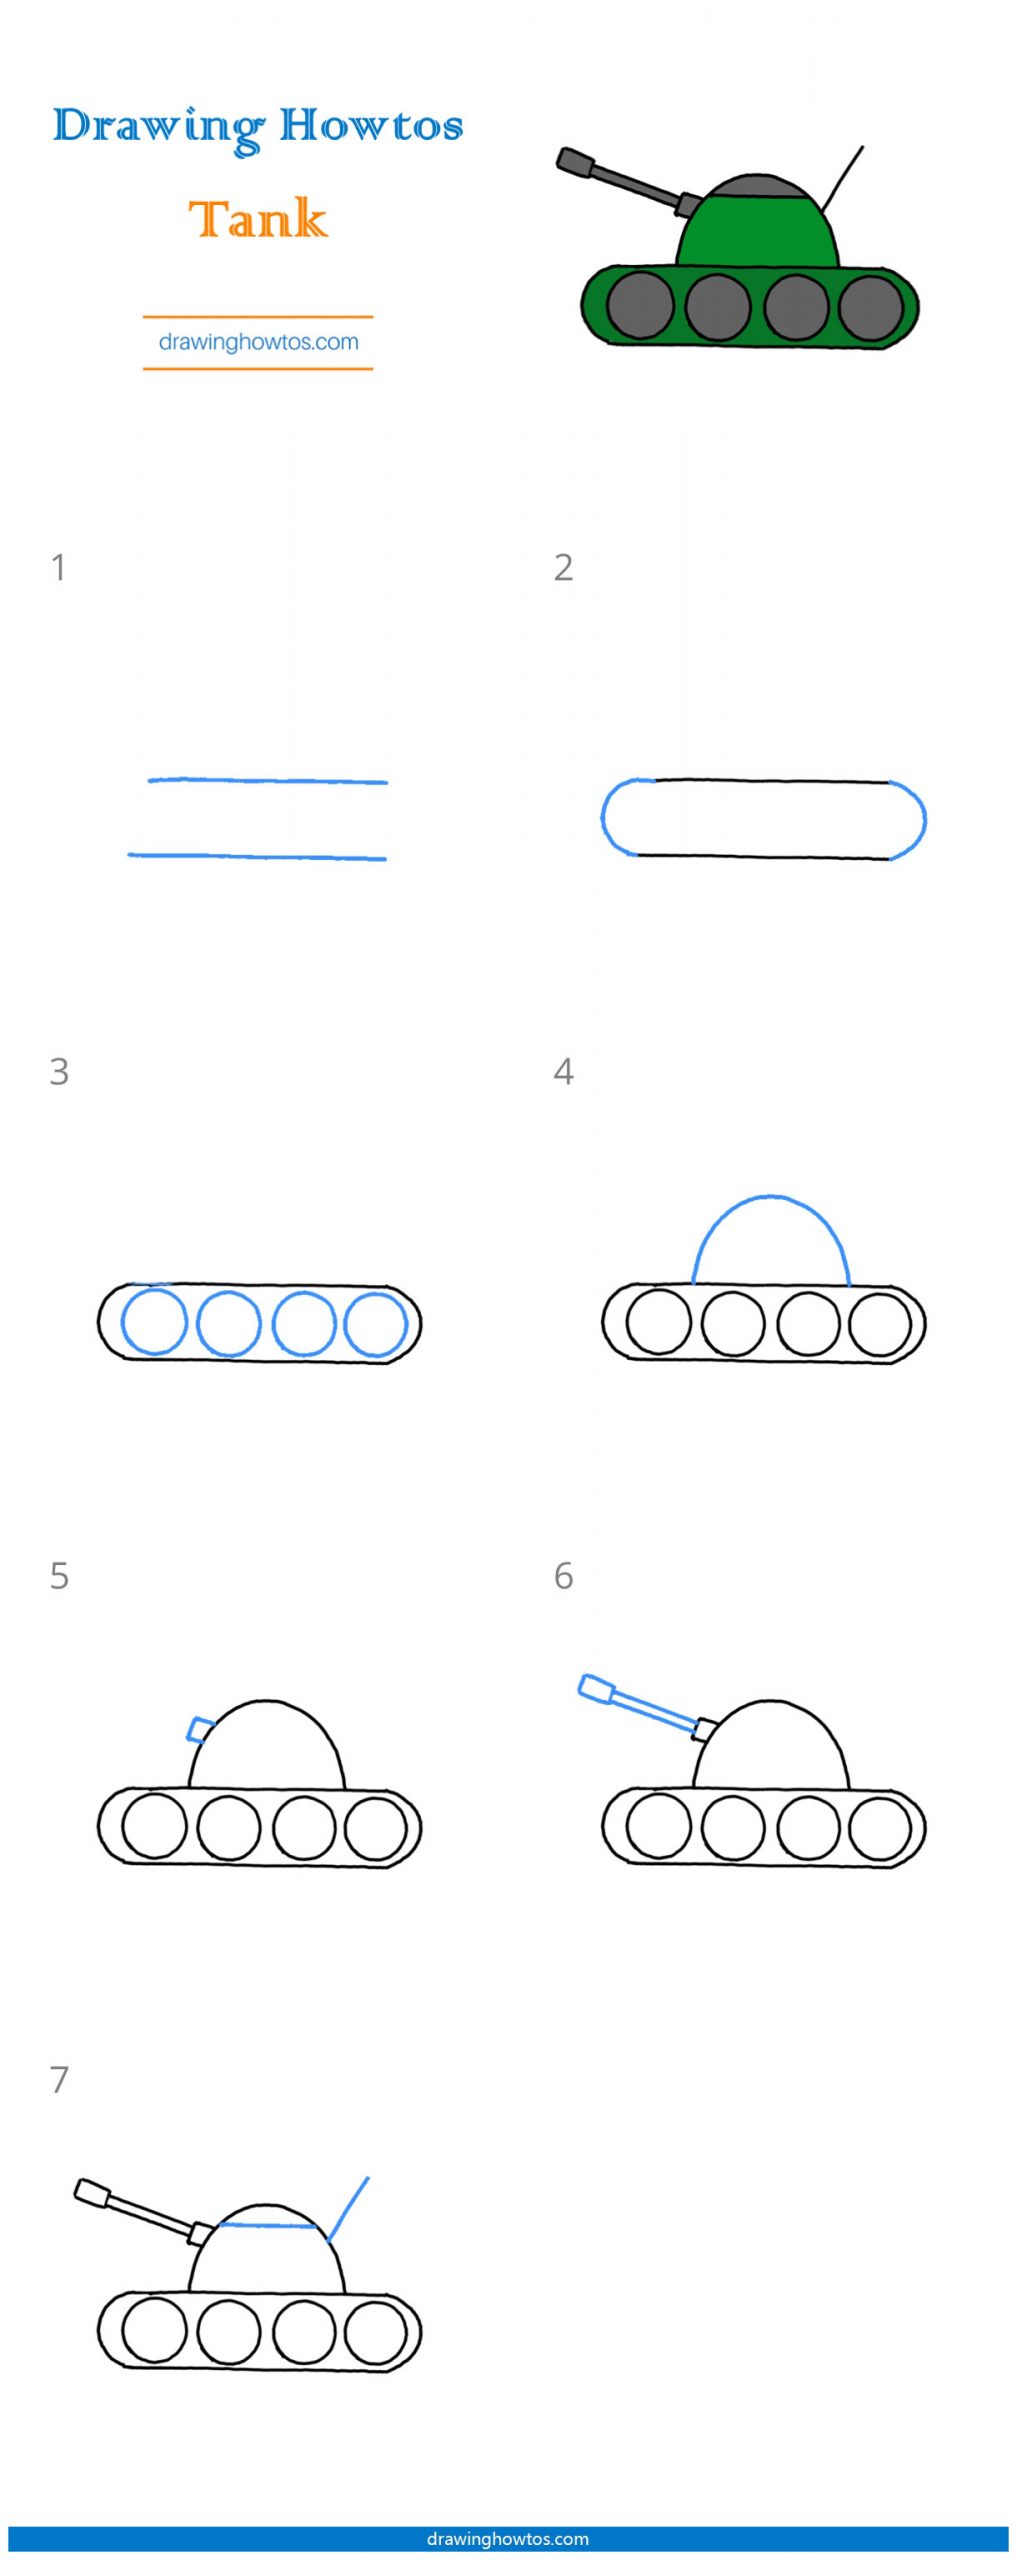 How to Draw a Tank Step by Step